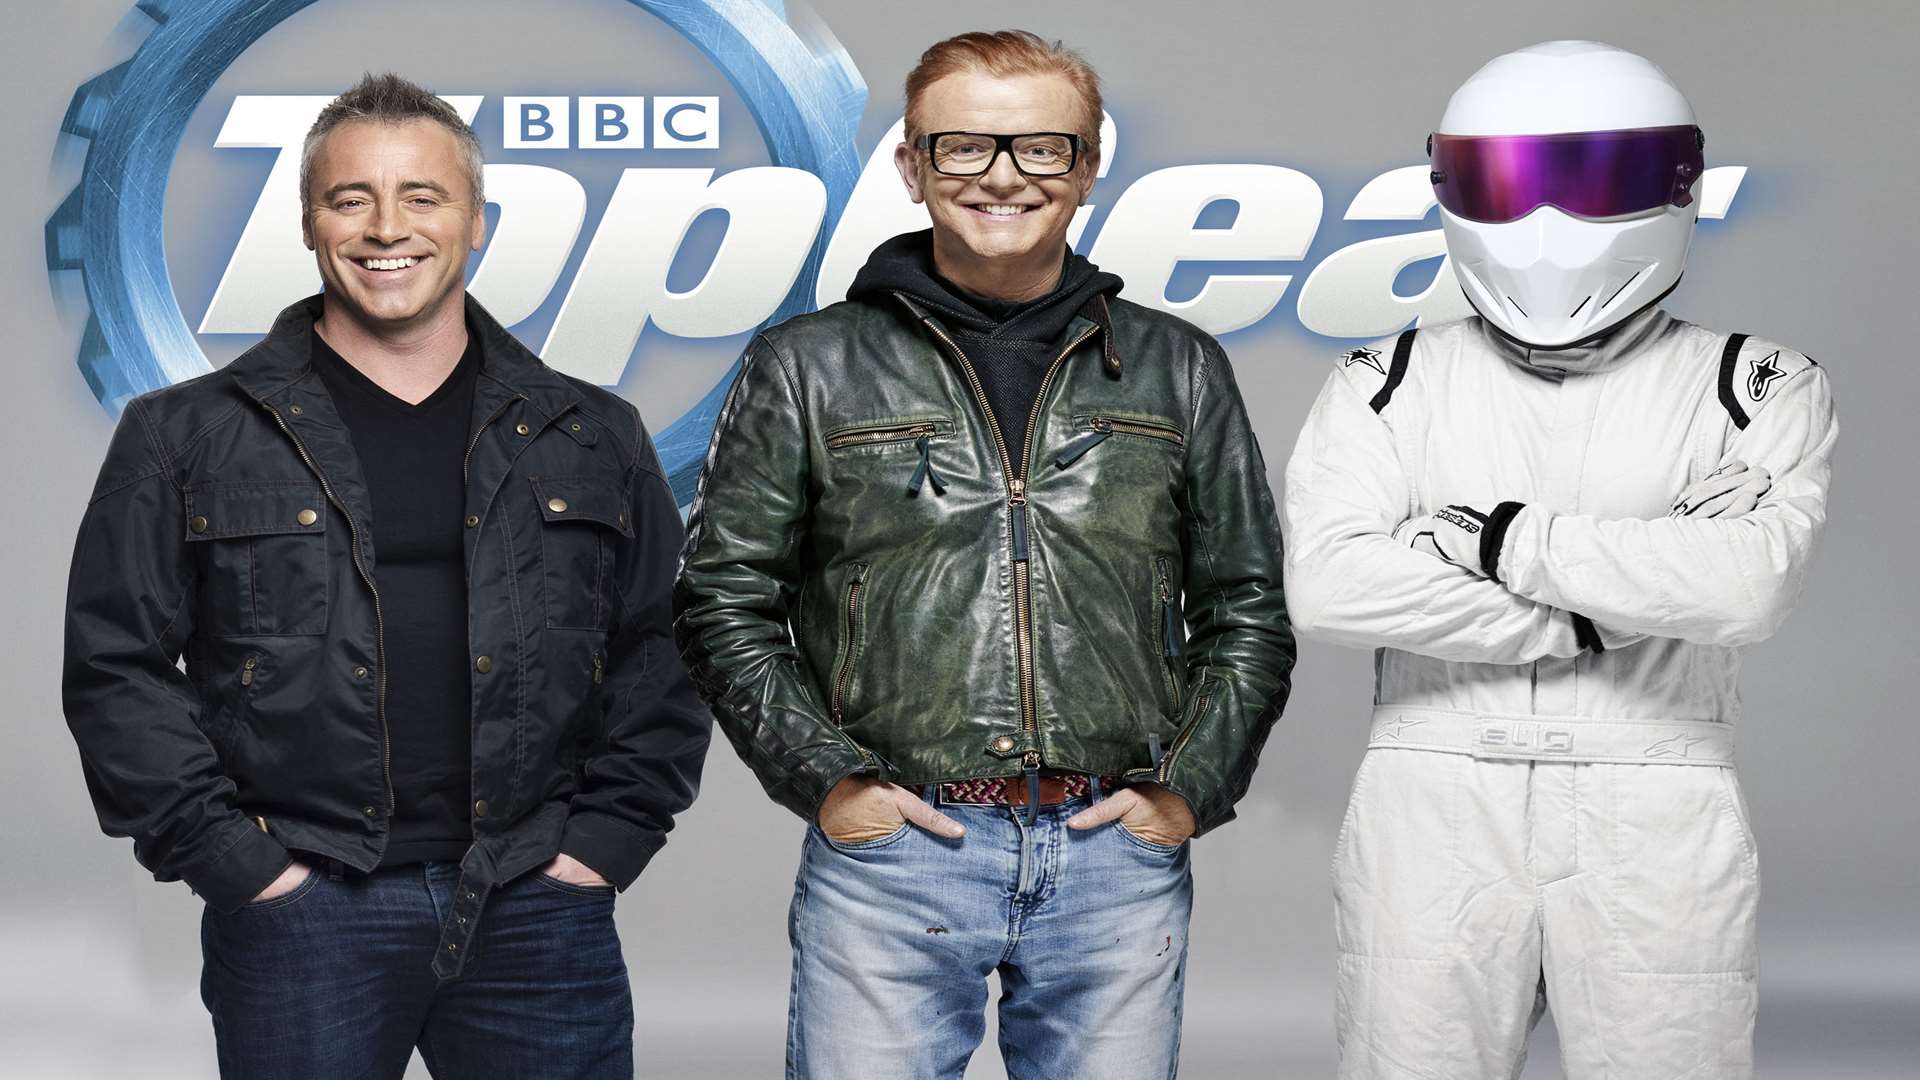 Matt Le Blanc and radio DJ Chris Evans are among the line-up for the new Top Gear series